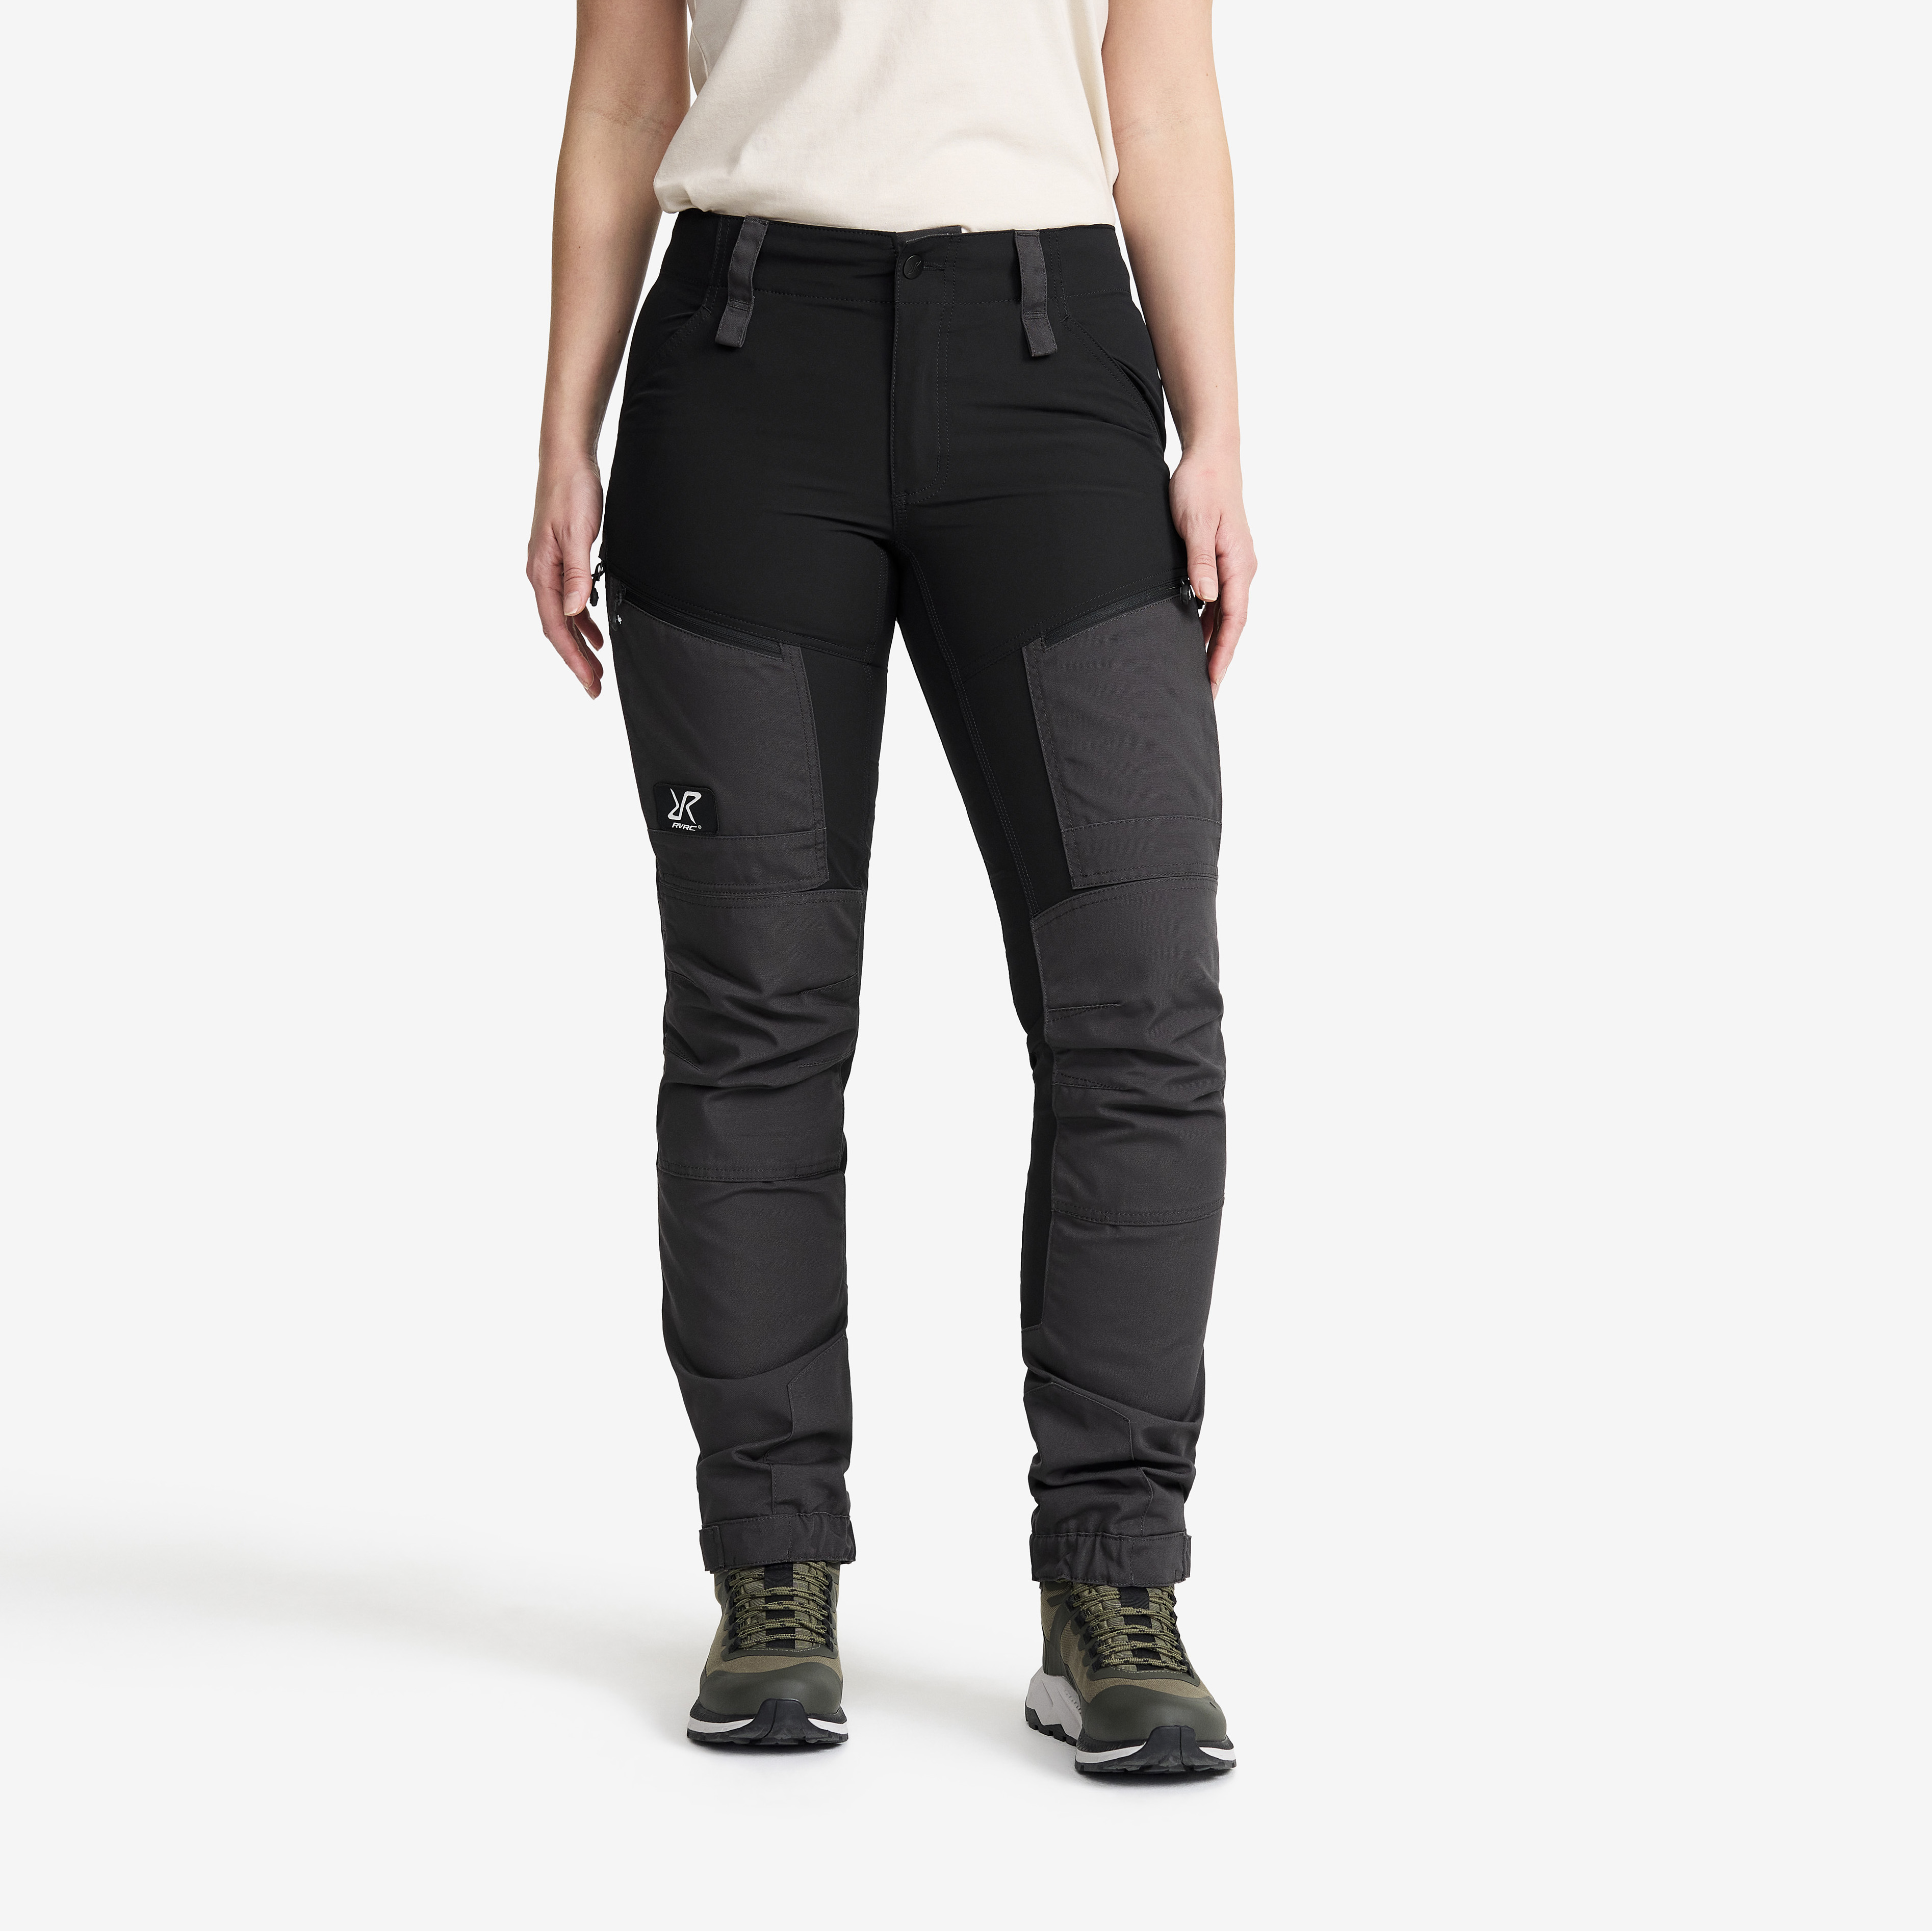 Hiking Pants Women: Recycled Clamber 35 inseam